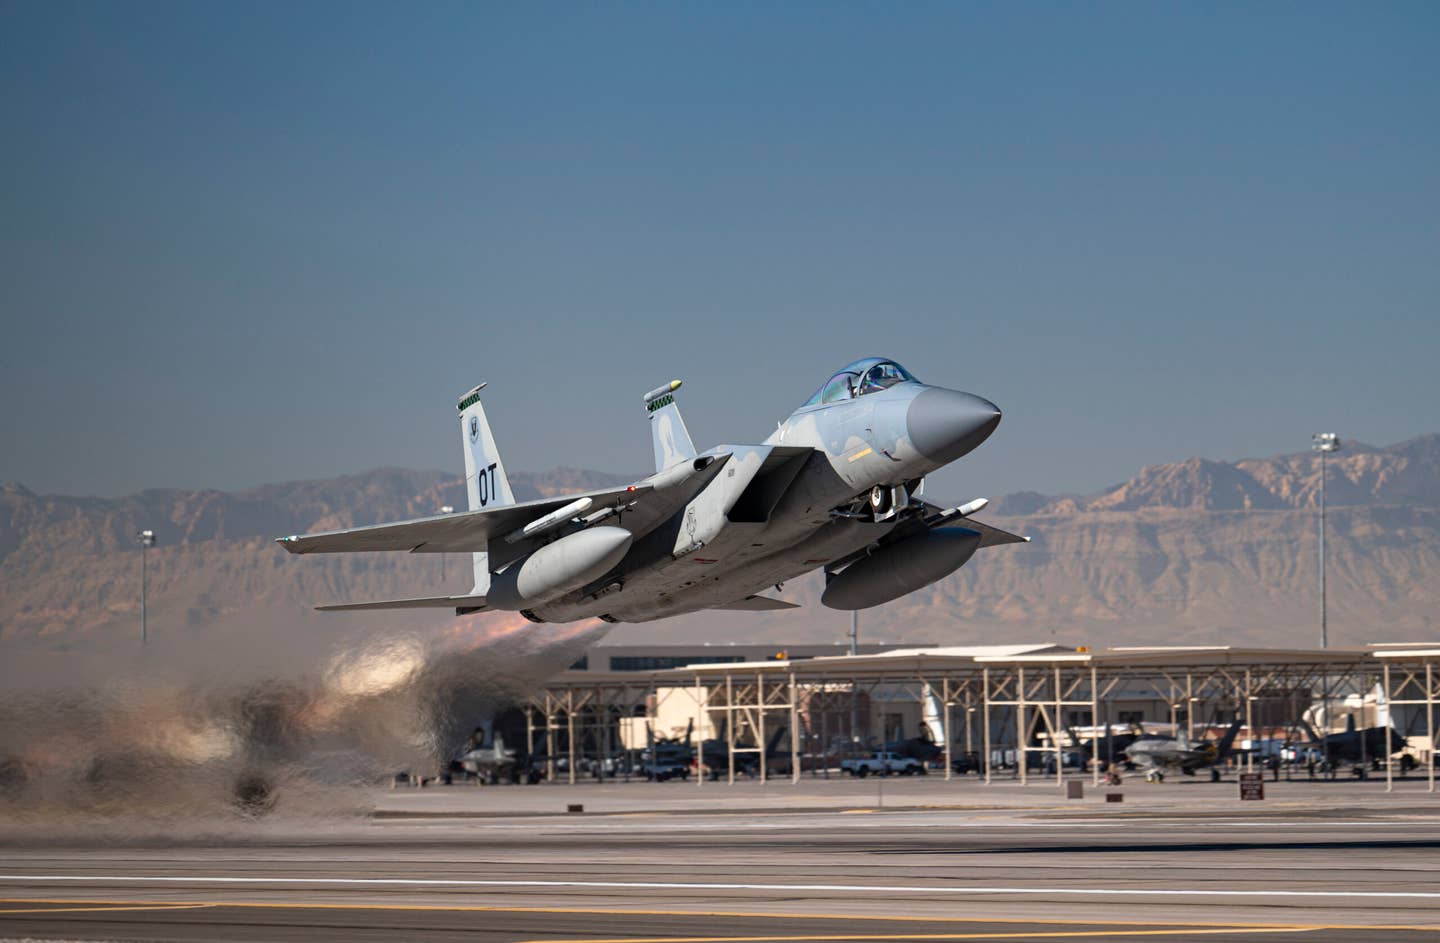 An F-15C Eagle takes off to conduct its final defensive counter-air vul during Weapons School Integration 21-B at Nellis Air Force Base, Nevada, last December 2021. As part of the drawdown of the F-15C/D, this was the final F-15C Weapons Instructor Course to be taught at the United States Air Force Weapons School. <em>U.S. Air Force photo</em>